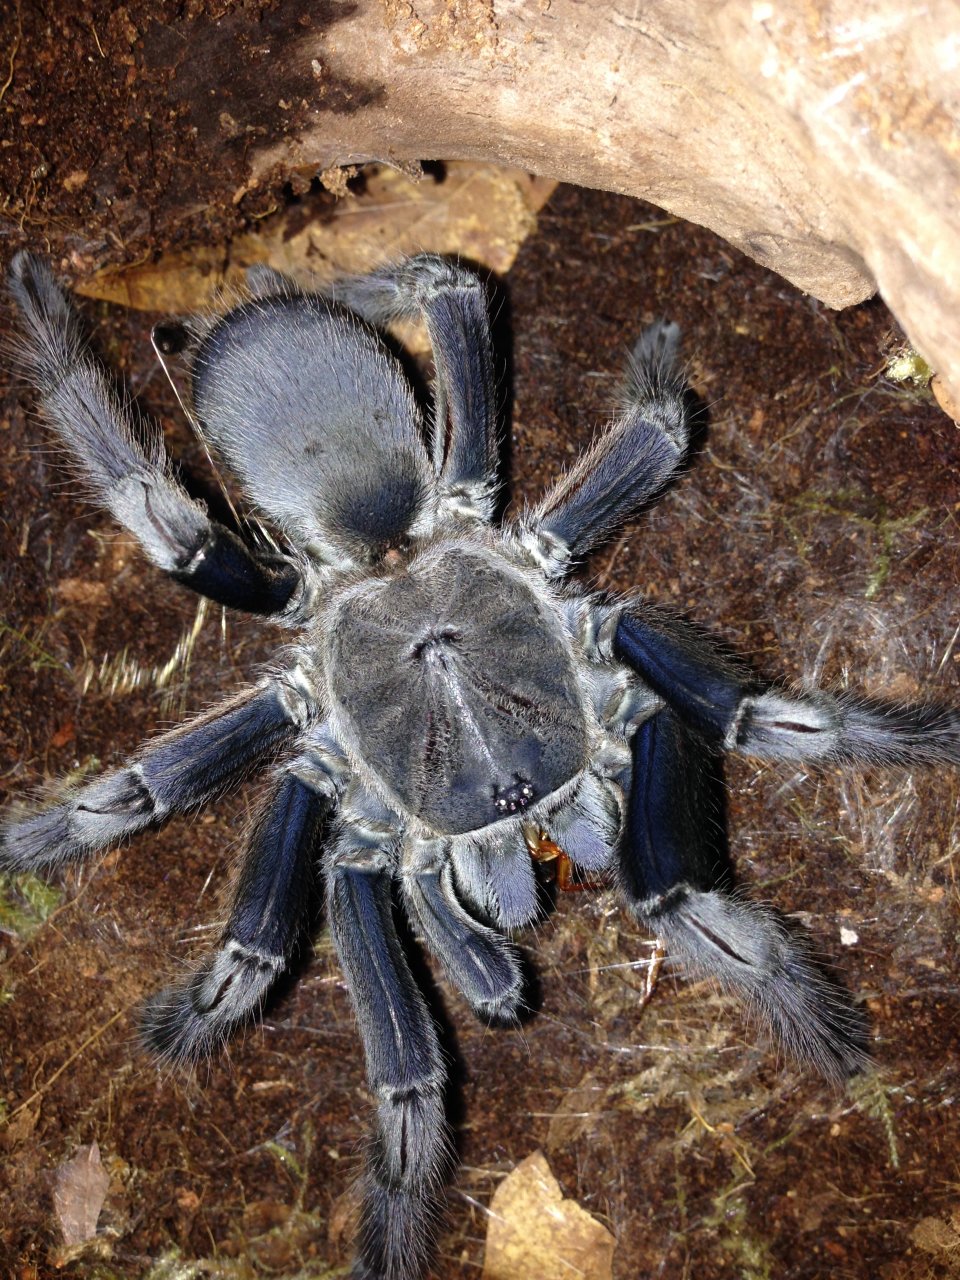 Sold as C. minax?? Possibly Chilobrachys??